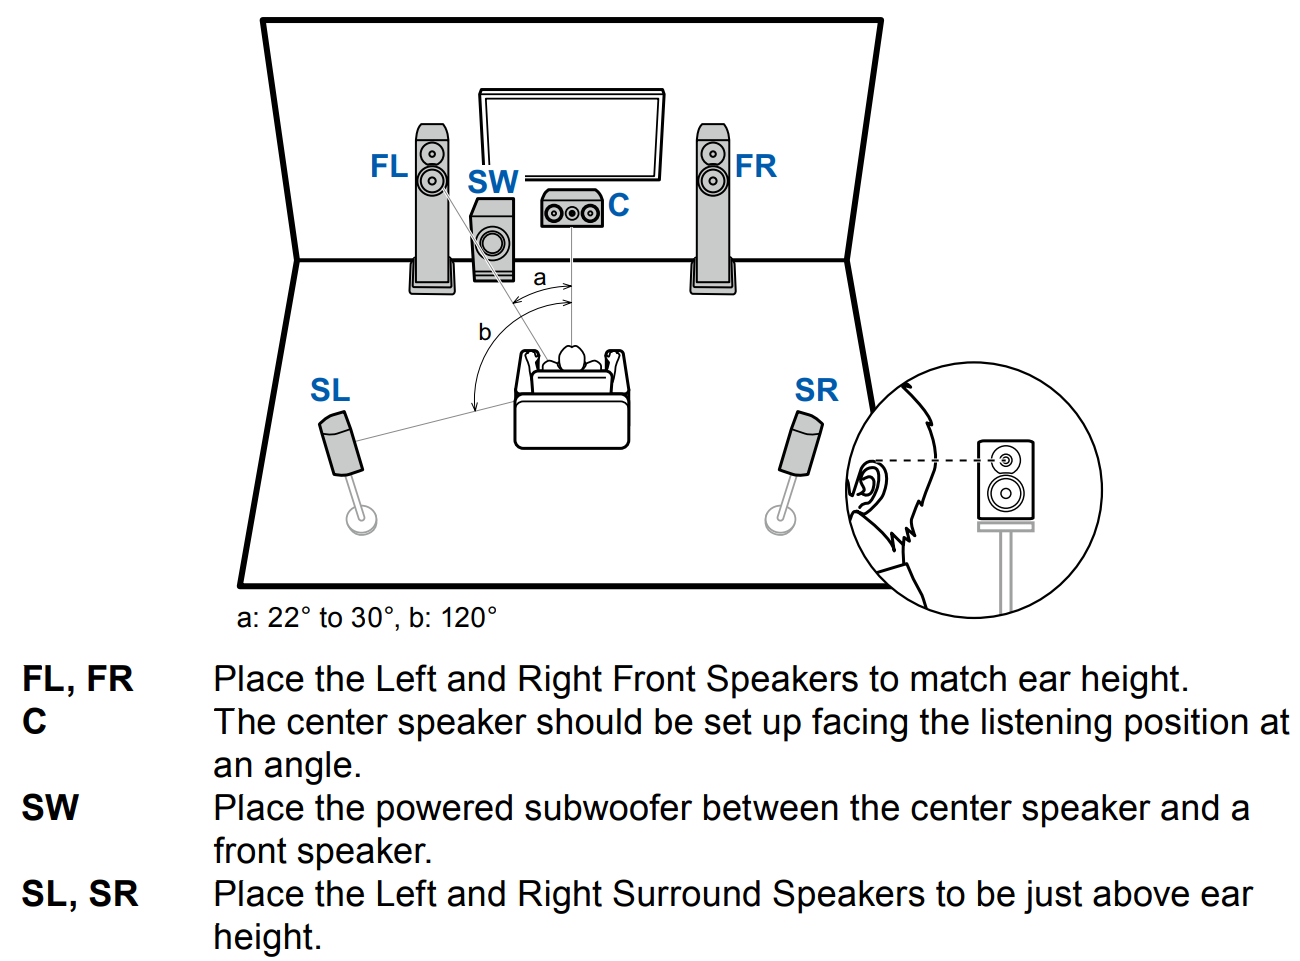 5.1 Surround Sound – The Right Speaker Placement